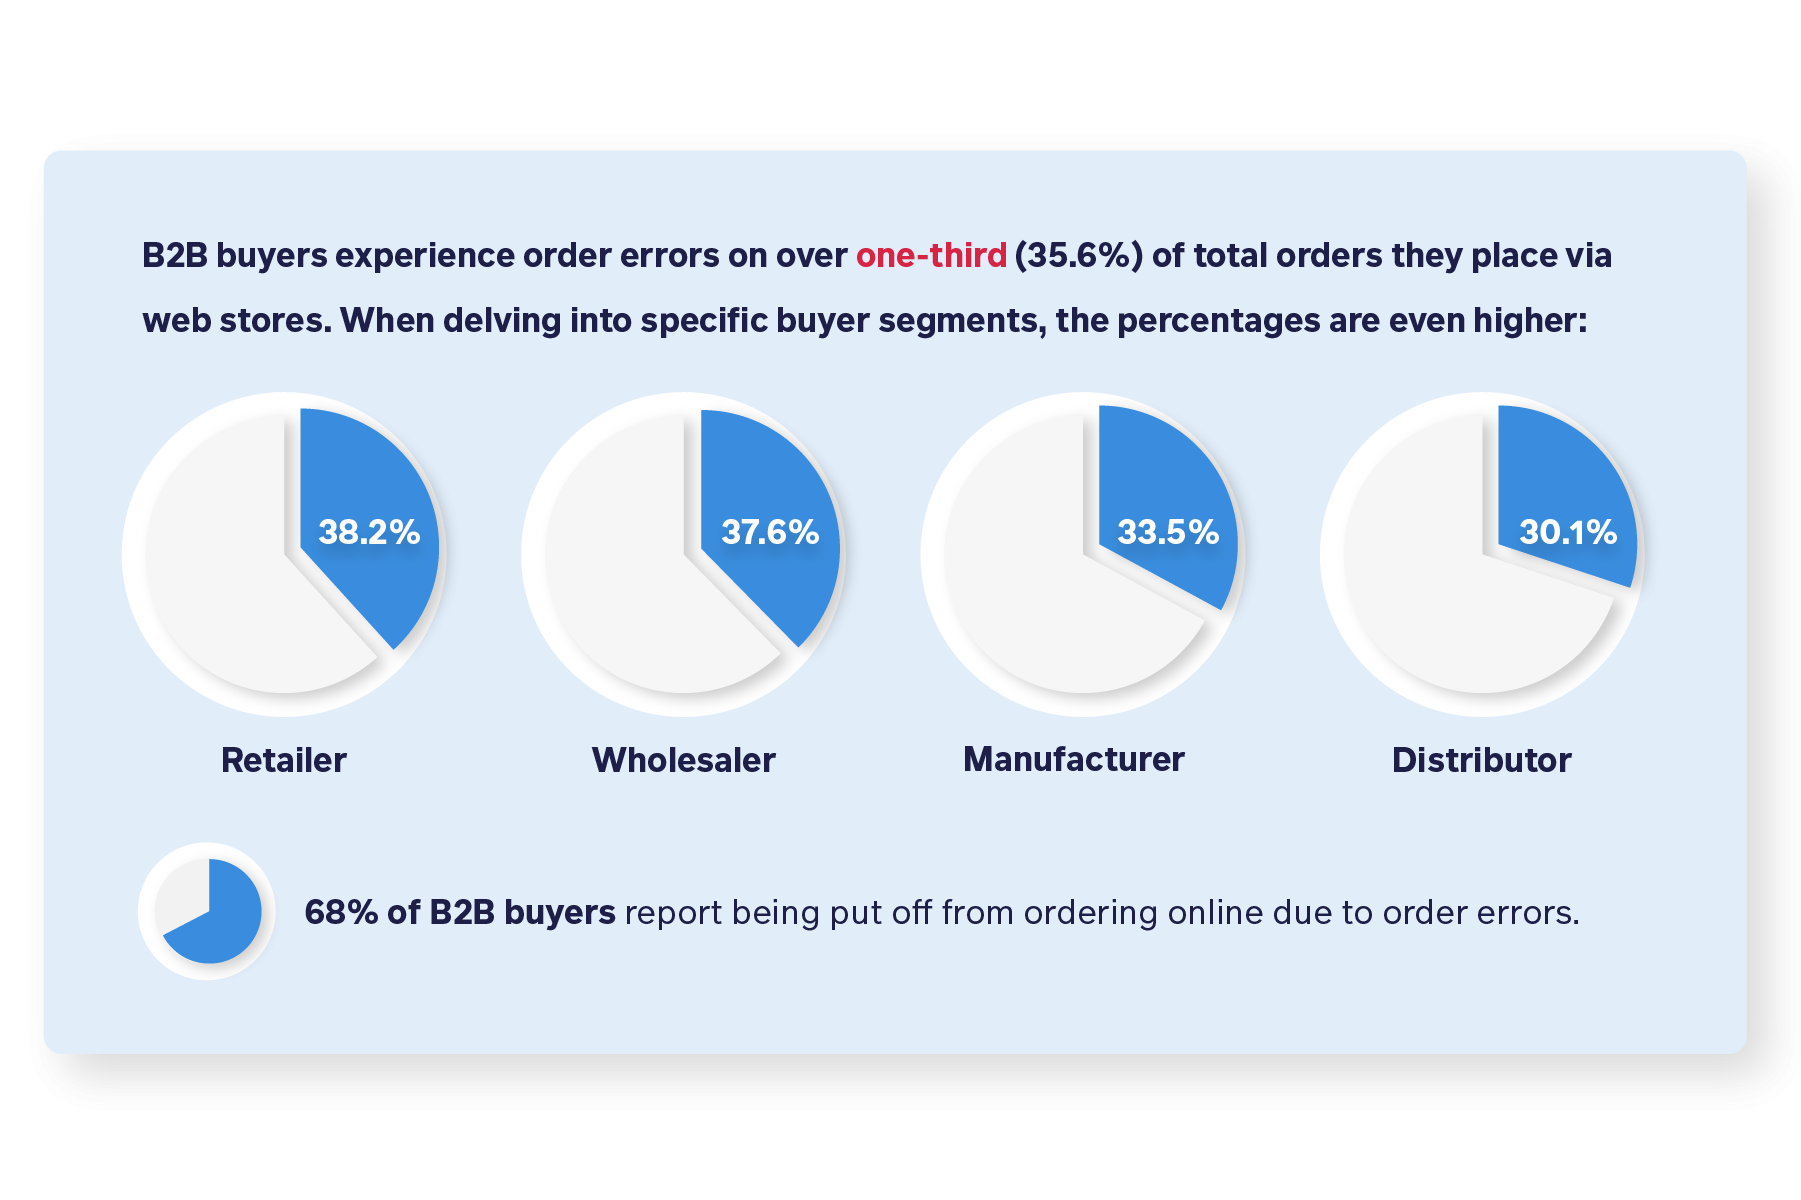 B2B buyers experience order errors on over one-third (35.6%) of total orders that place via web stores. When delving into specific buyer segments, the percentages are even higher: Retailer 38.2% Wholesaler 37.6% Manufacturer 33.5% Distributor 30.1% 68% of B2B buyers report being put off from ordering online due to order errors